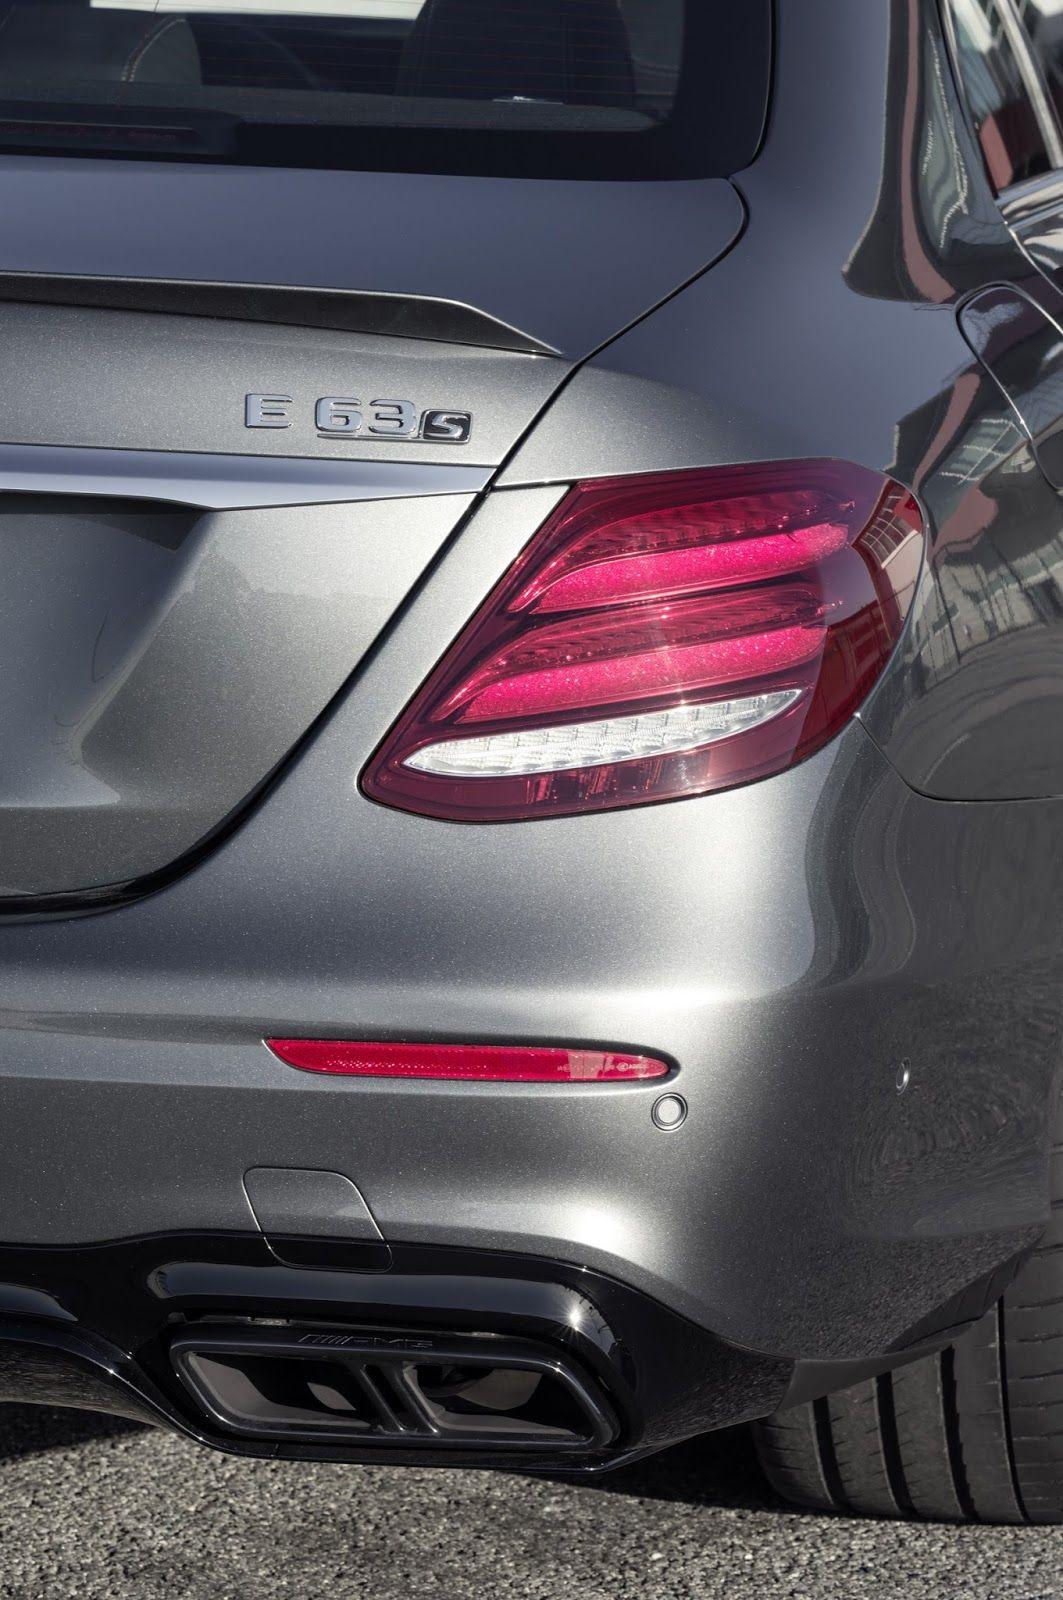 Mercedes AMG E63 & E63 S Get Up To 603HP, Hit 62MPH